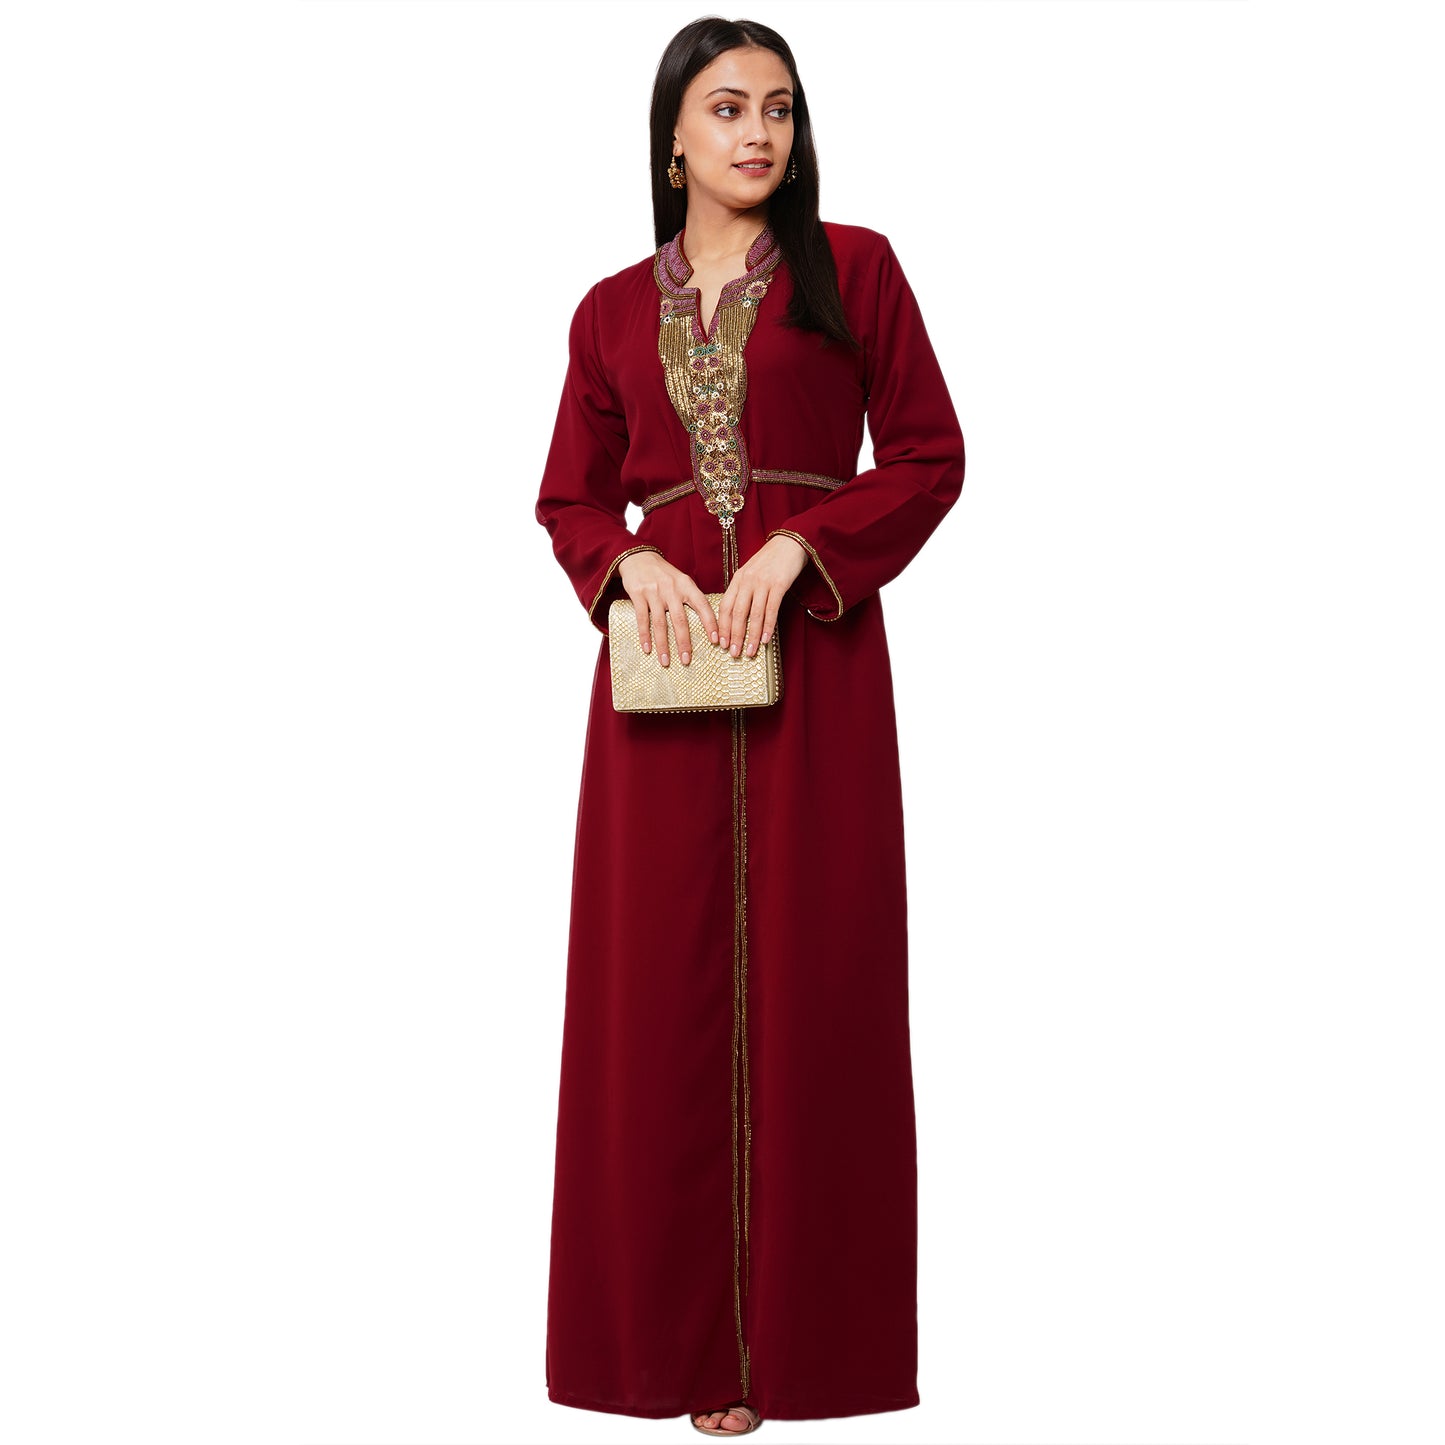 Load image into Gallery viewer, Embroidered Abaya Maxi Dress - Maxim Creation
